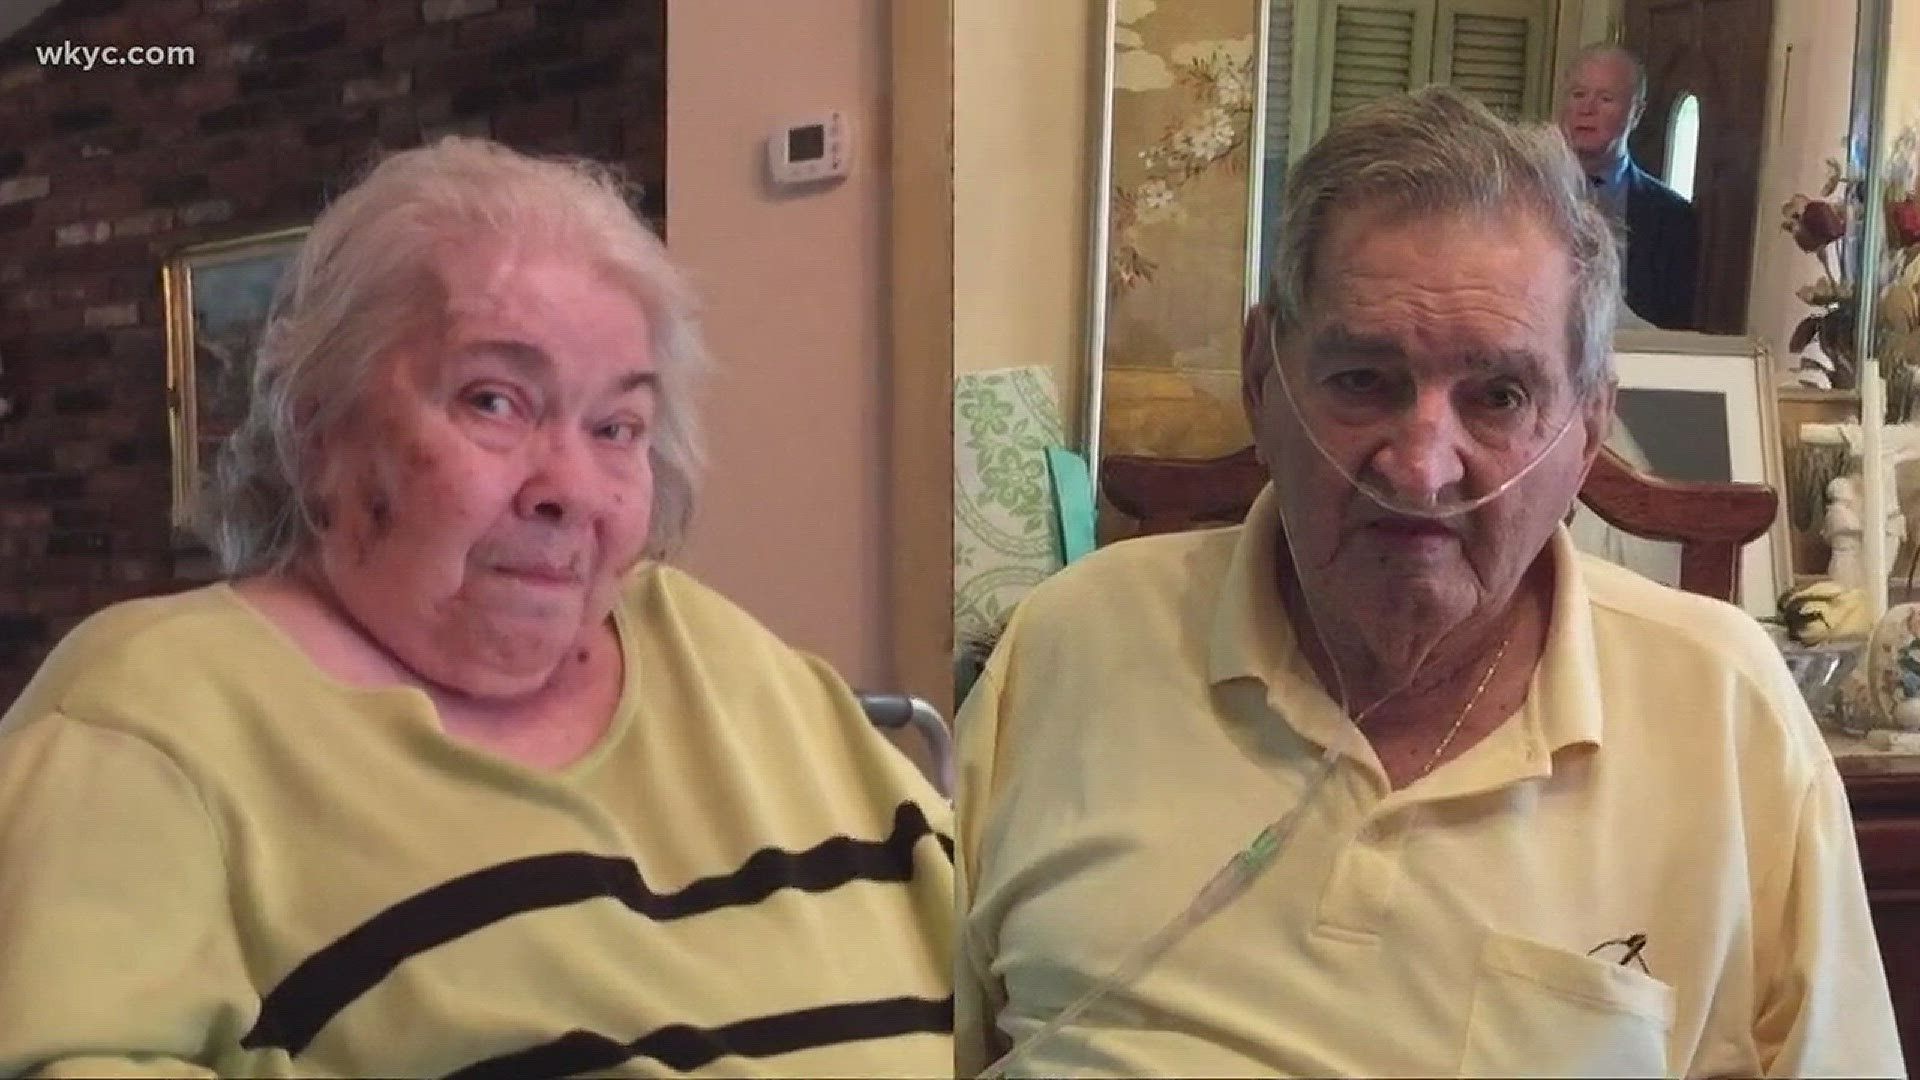 Investigator: Home care crooks steal from elderly under their care